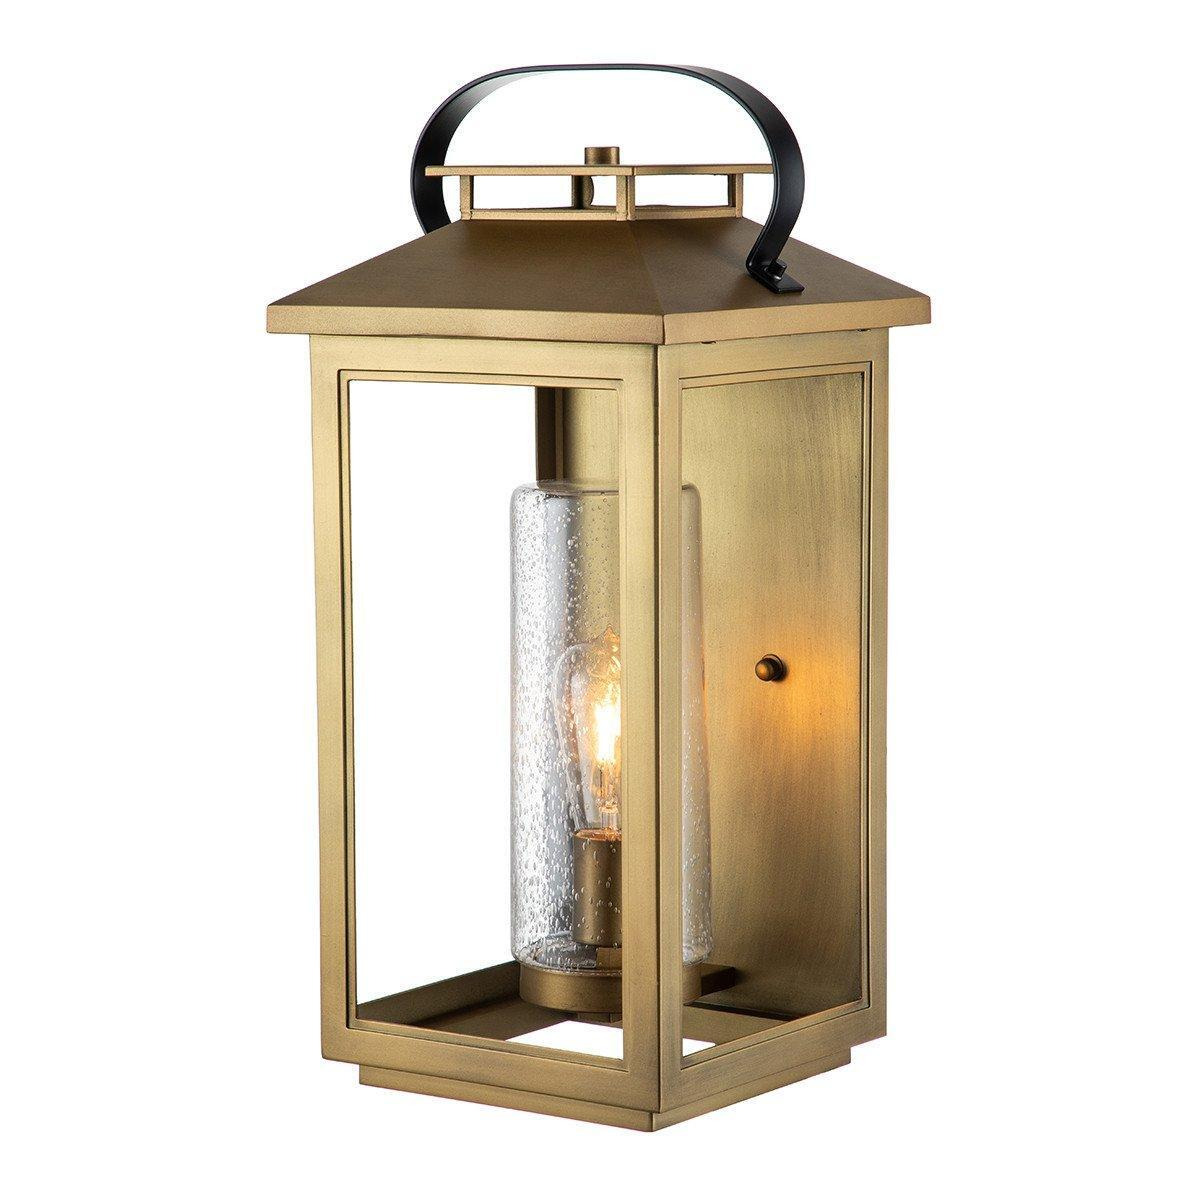 Hinkley Atwater Outdoor Wall Lantern Painted Distressed Brass IP44 - image 1